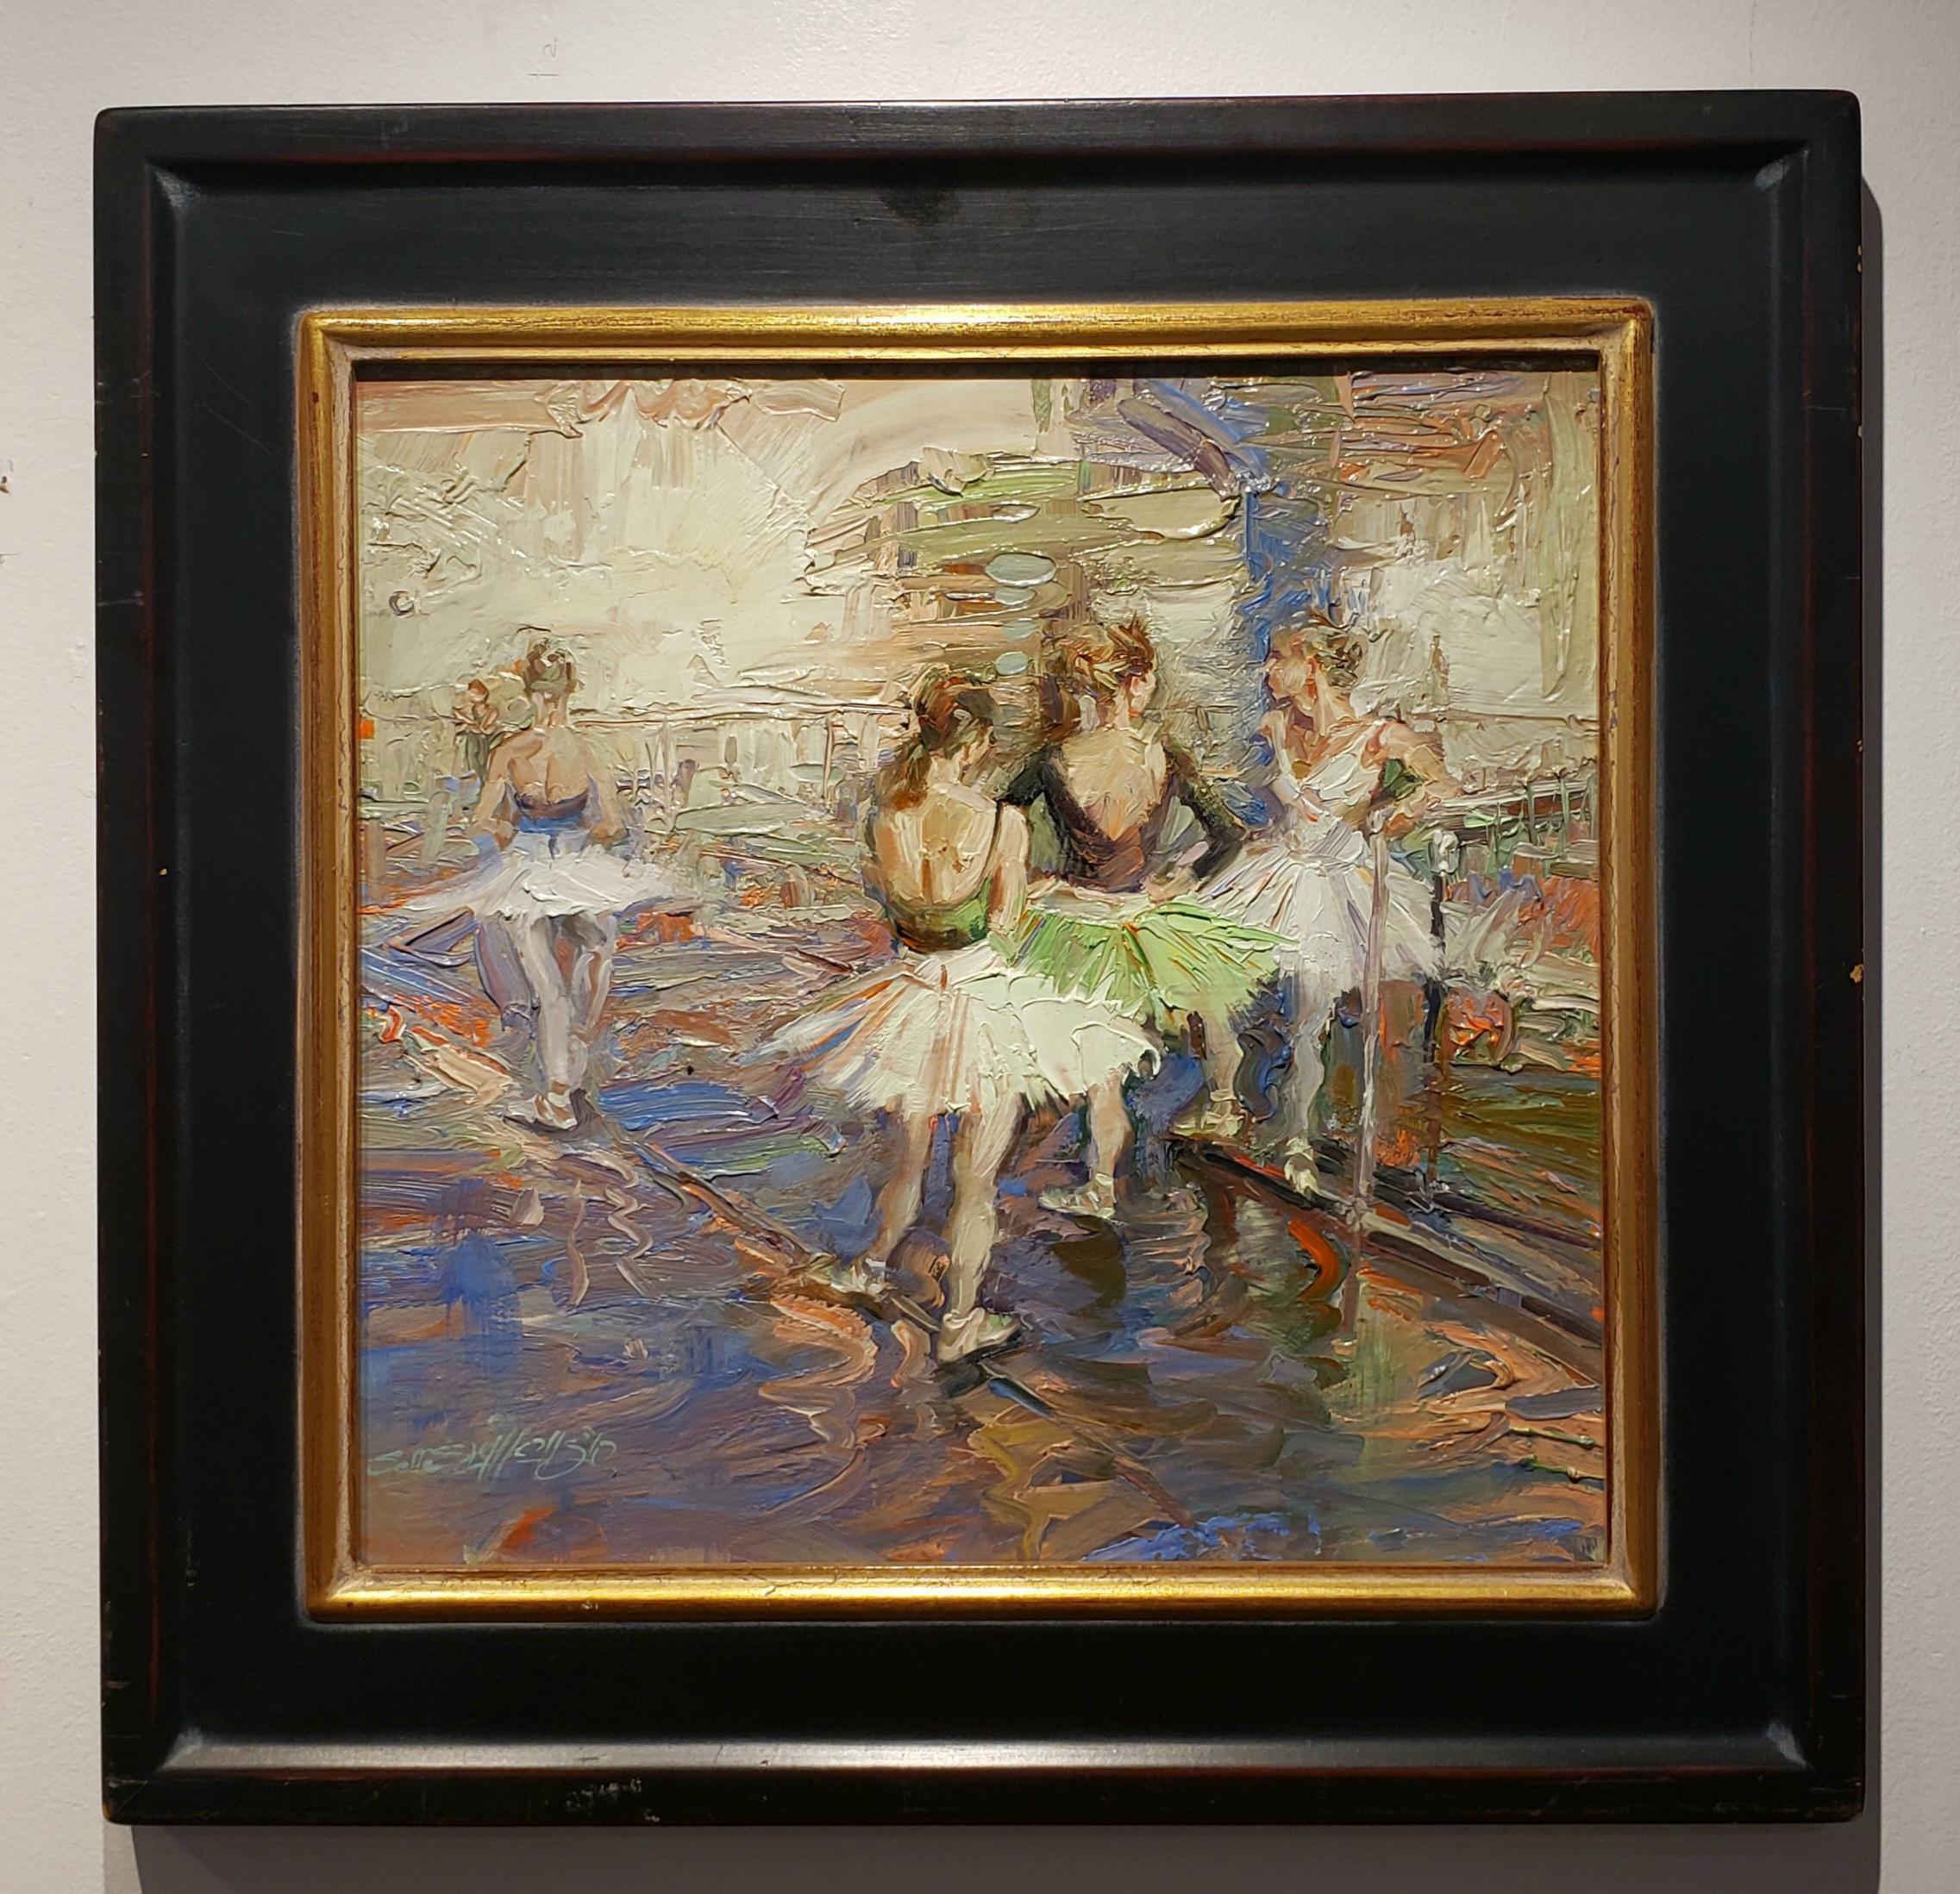 HIGH RESOLUTION PHOTOS AVAILABLE.  FREE SHIPPING.
Chit Chat can be any ballet studio in the world. Jeff Slemons leaves it up to the viewer to decide where it is located. New York, Paris, Rome ?   The painting has a custom made frame which brings out